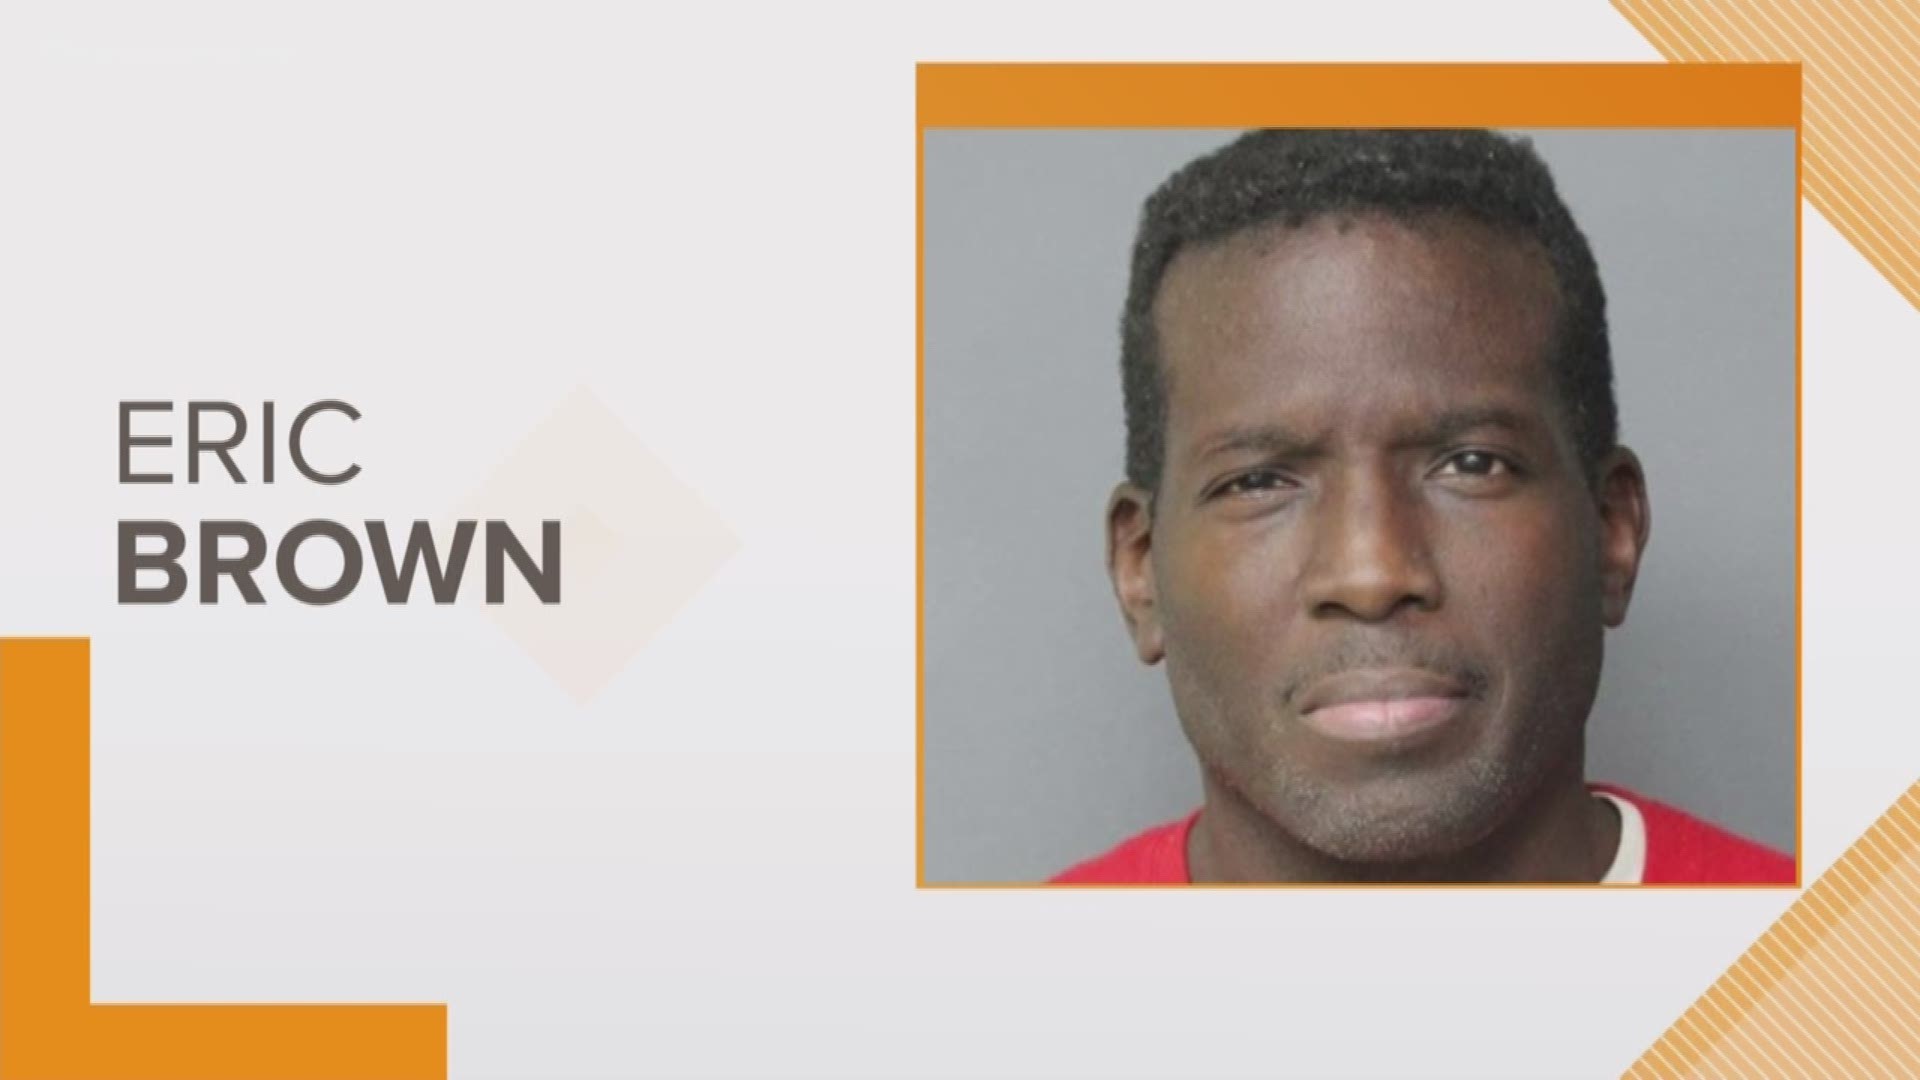 Eric Brown has been undergoing treatment for schizophrenia. He is accused of abducting and murdering Ashanti Billie in 2017.